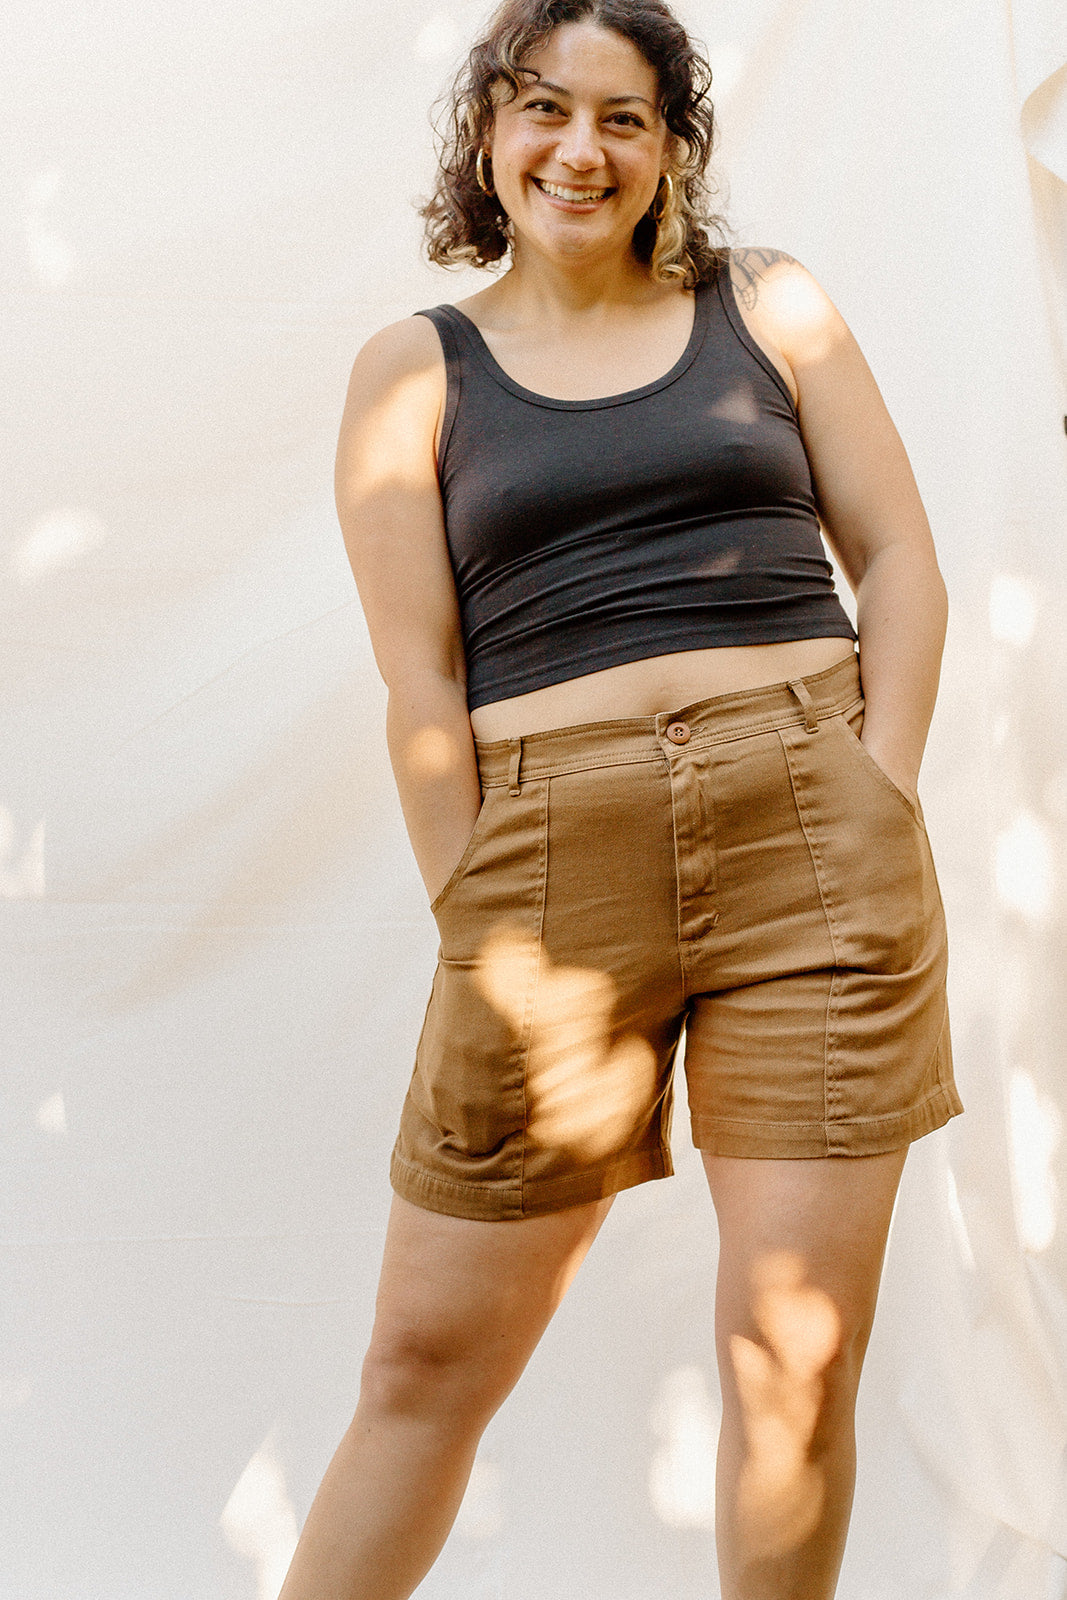 Hemp and cotton blend Venice shorts by Jungmaven. Inspired by the 1980s in Southern California and the ‘OP's’ we lived in.